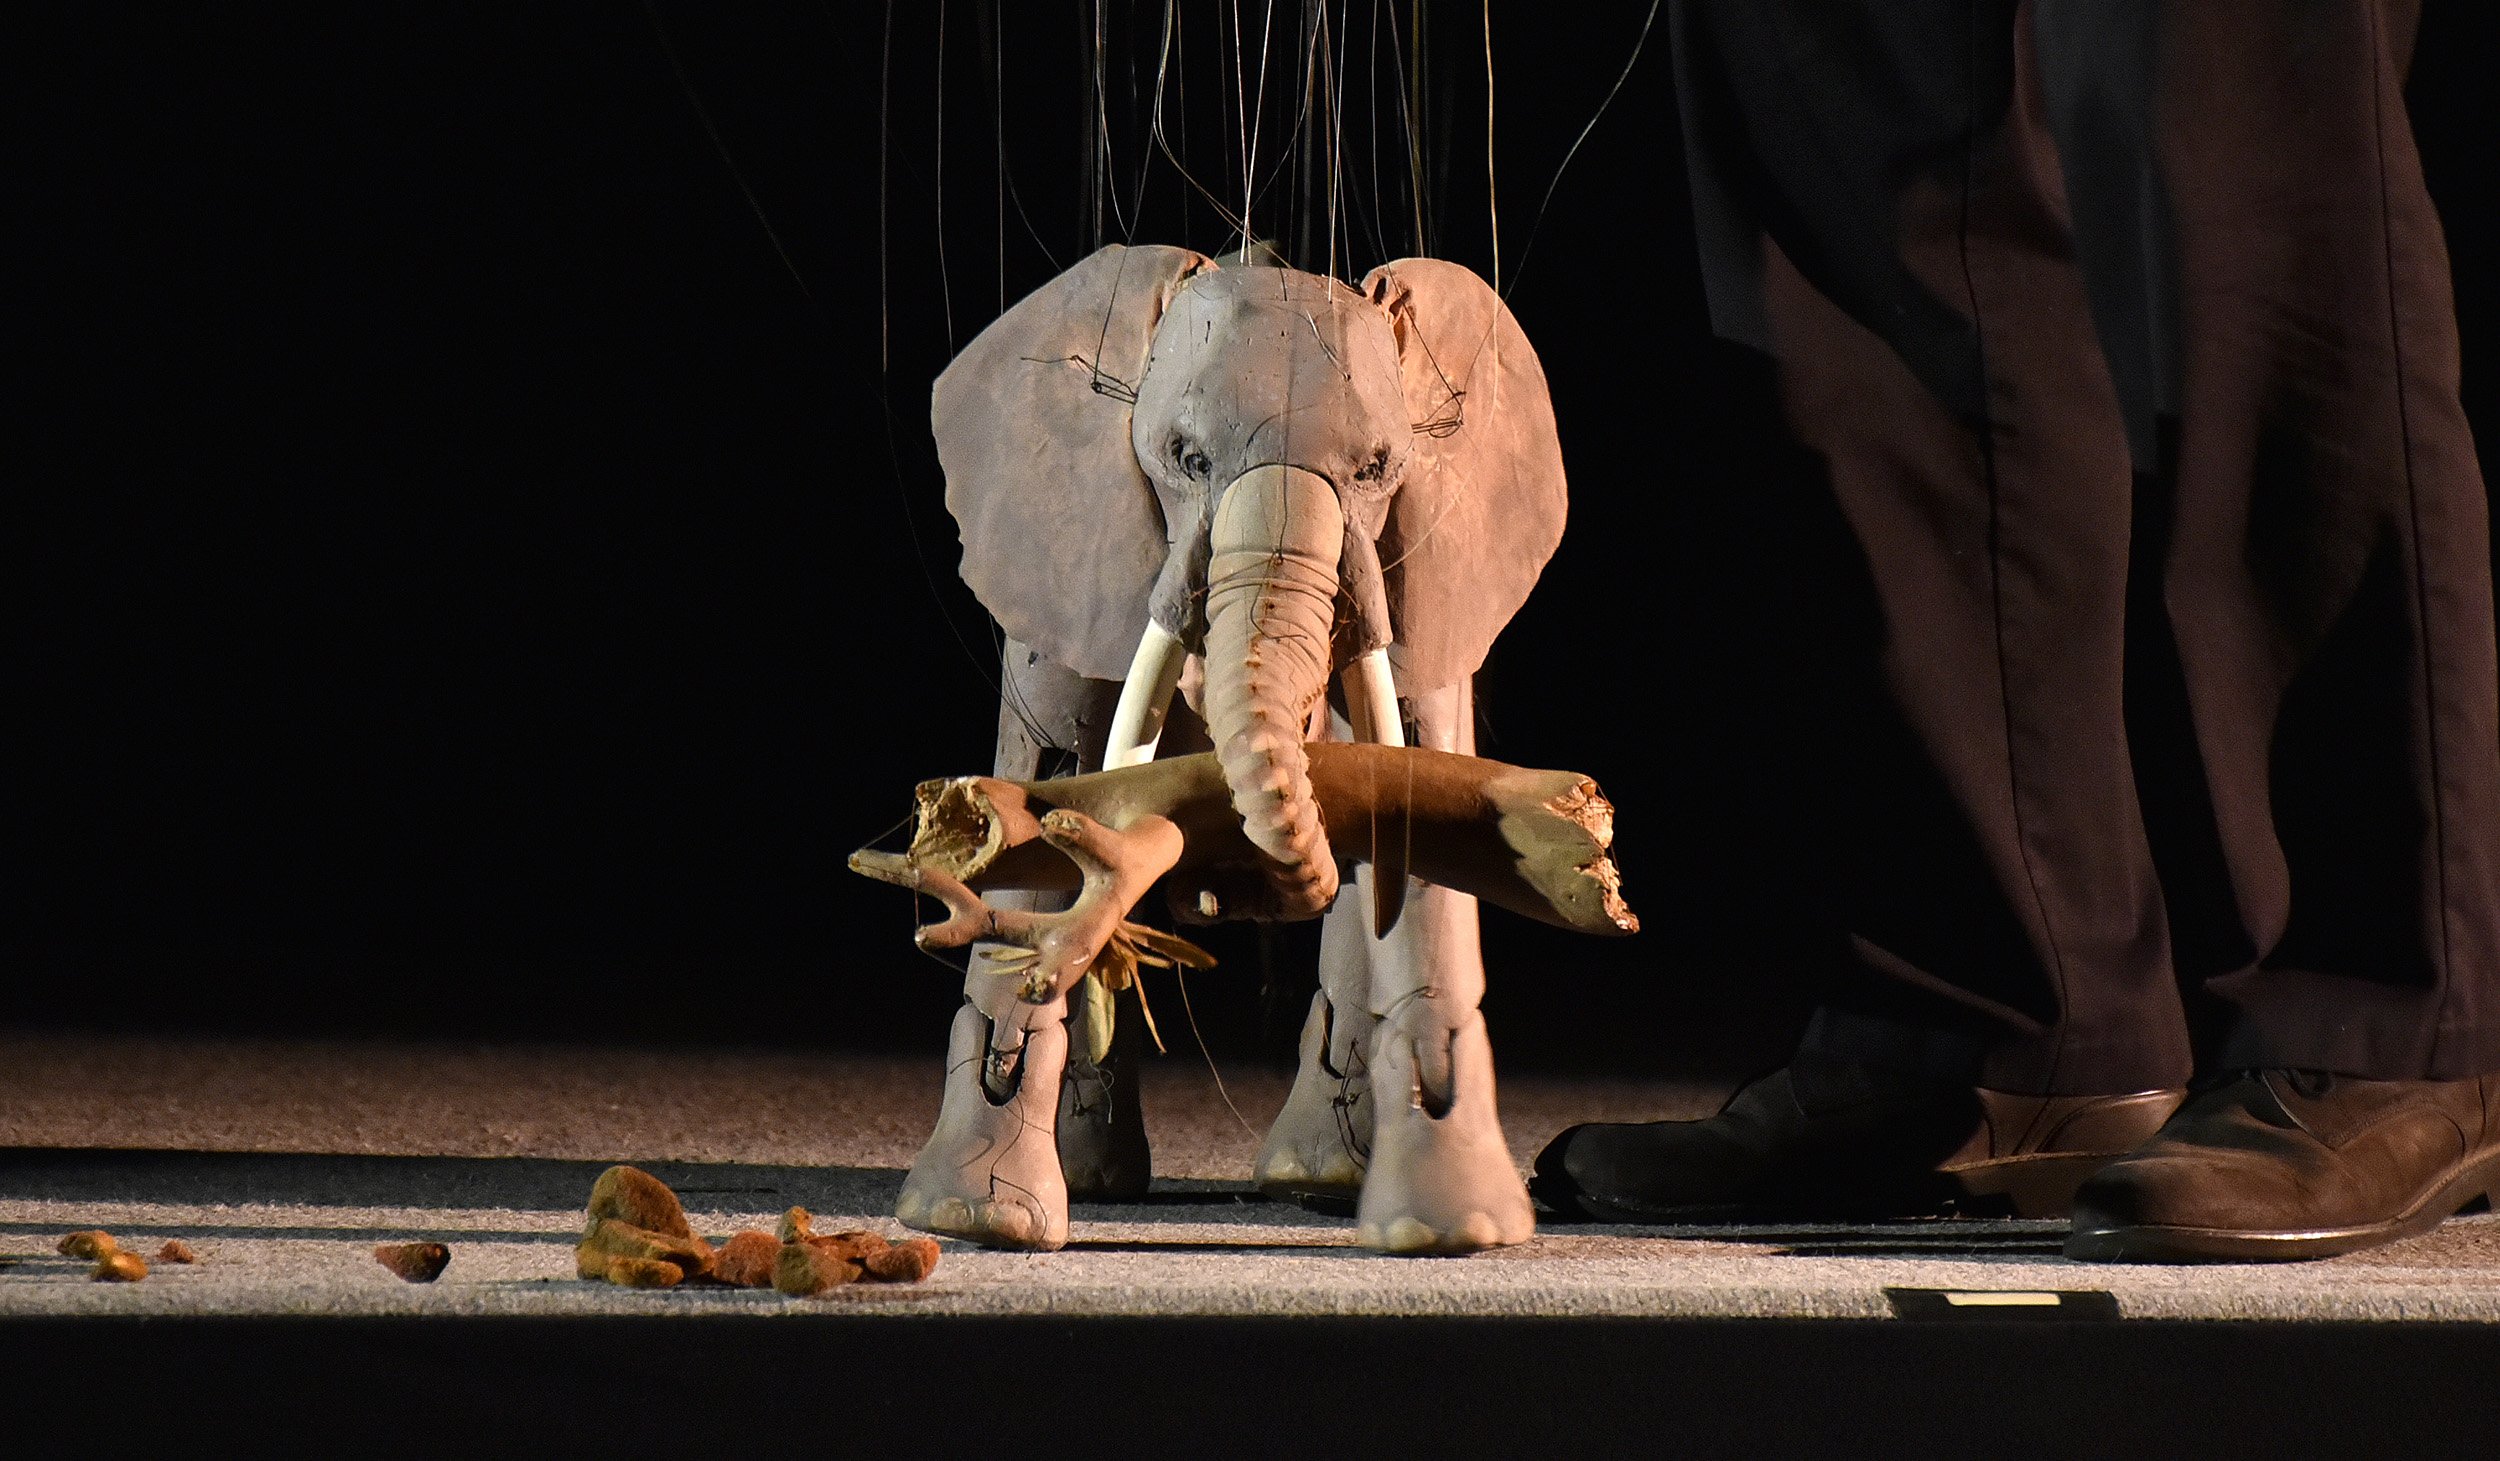 Marionette puppet of an elephant holding branches in its trunk.